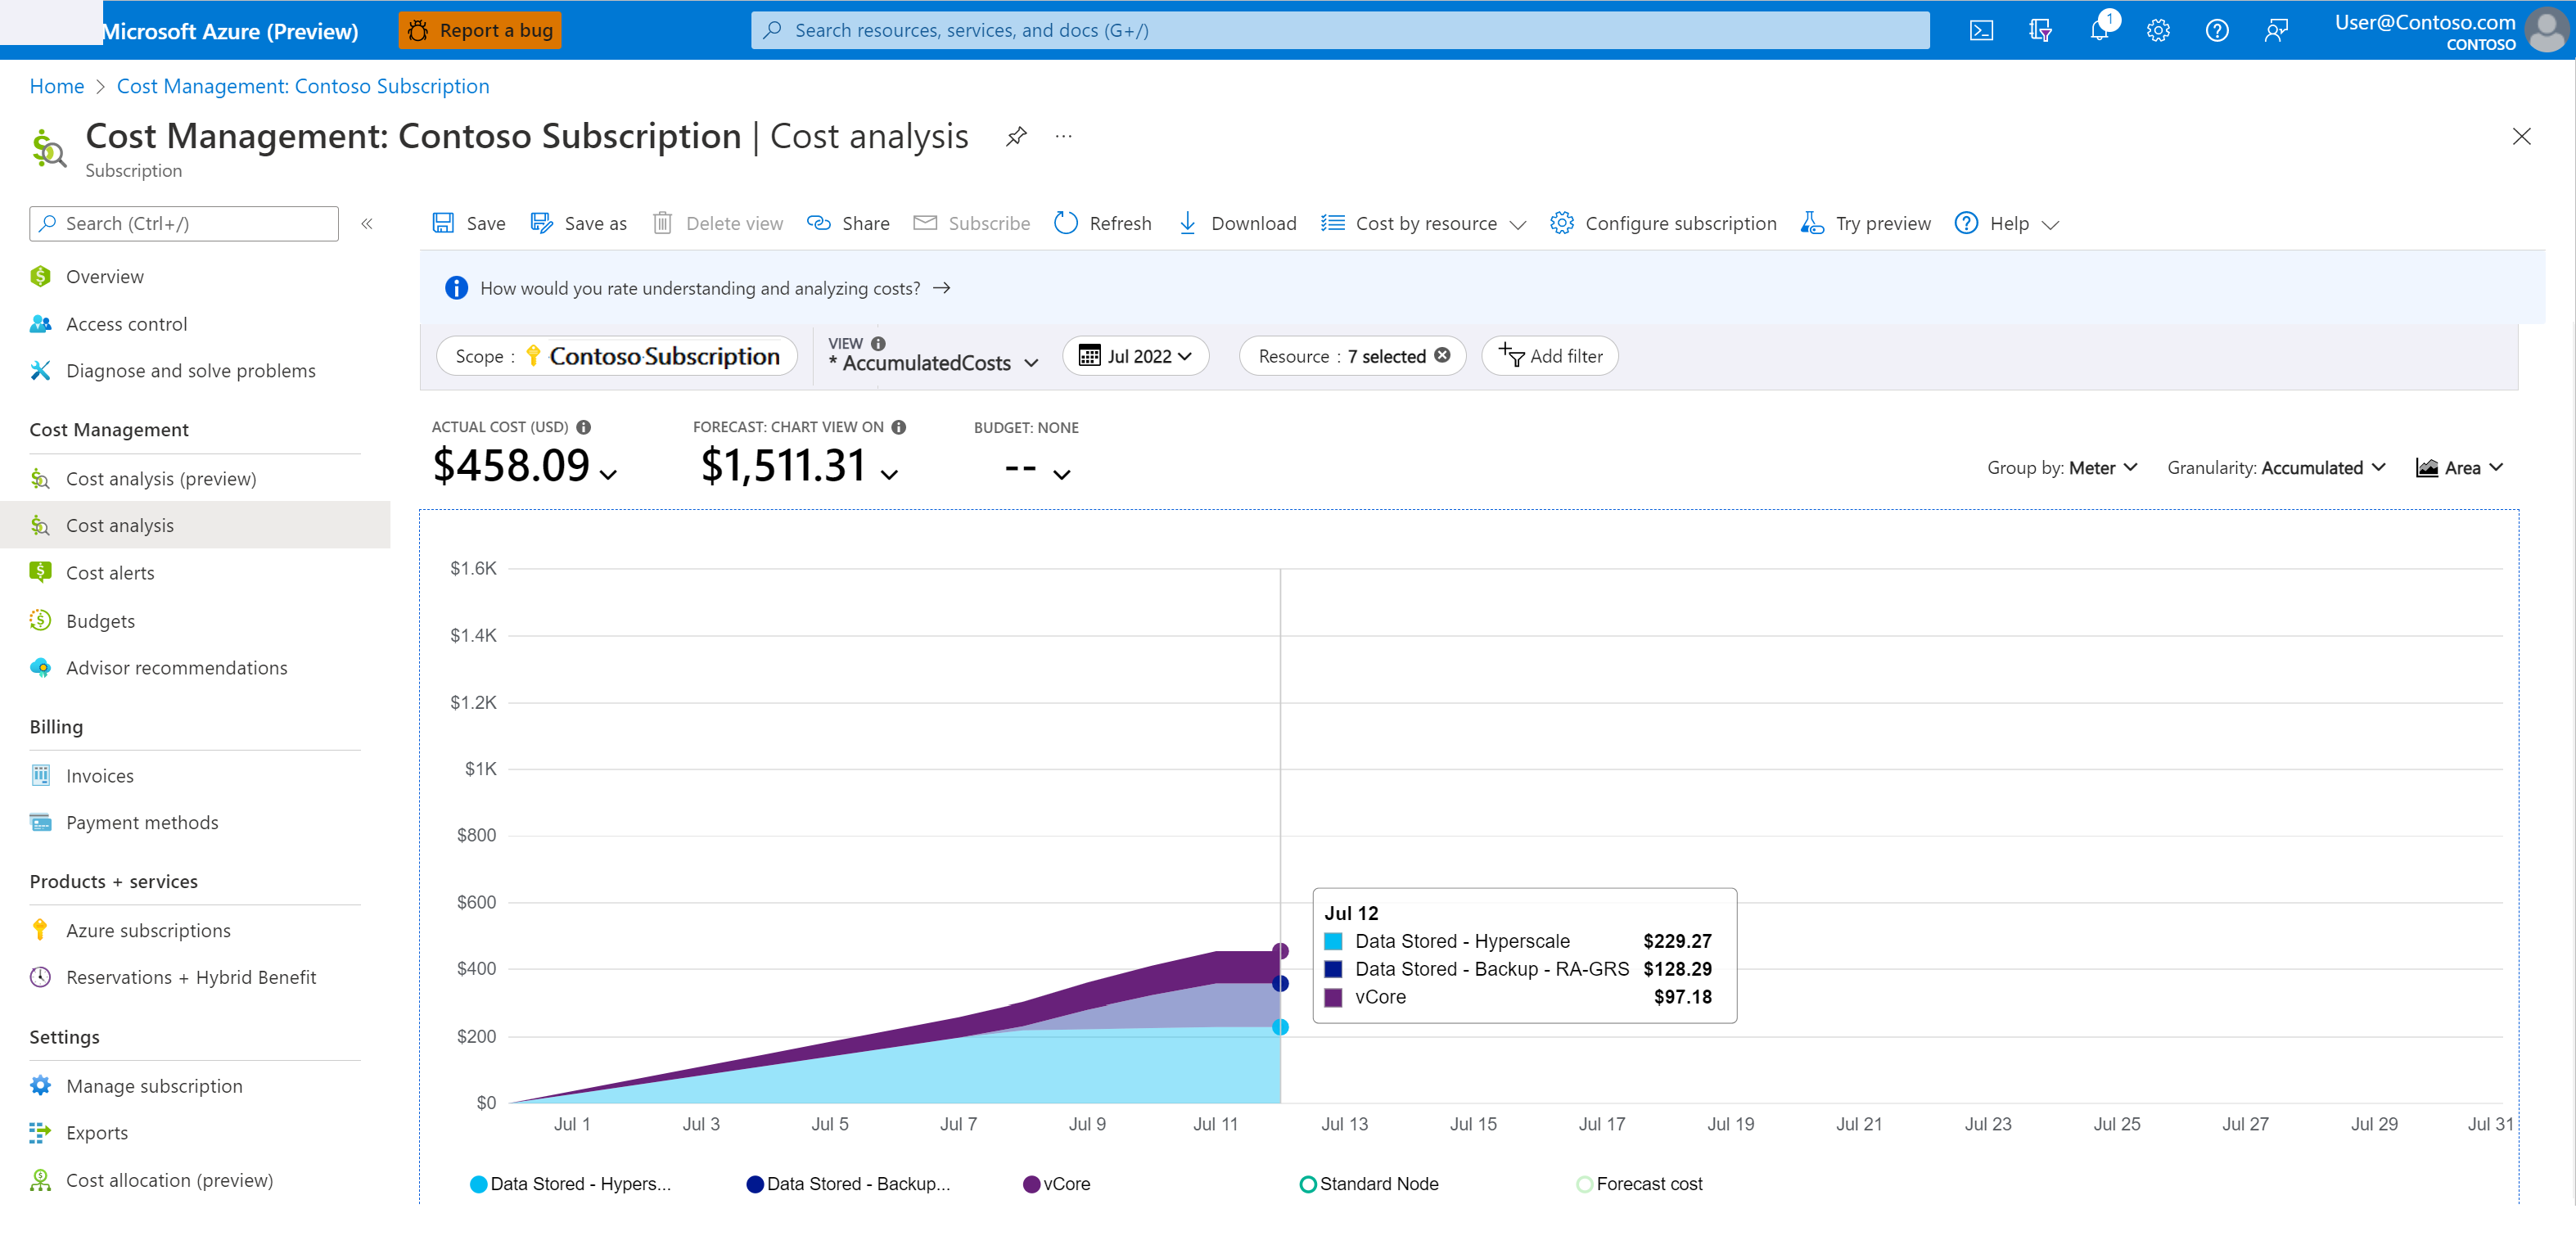 Screenshot of the Azure portal that shows Hyperscale Backup storage costs.